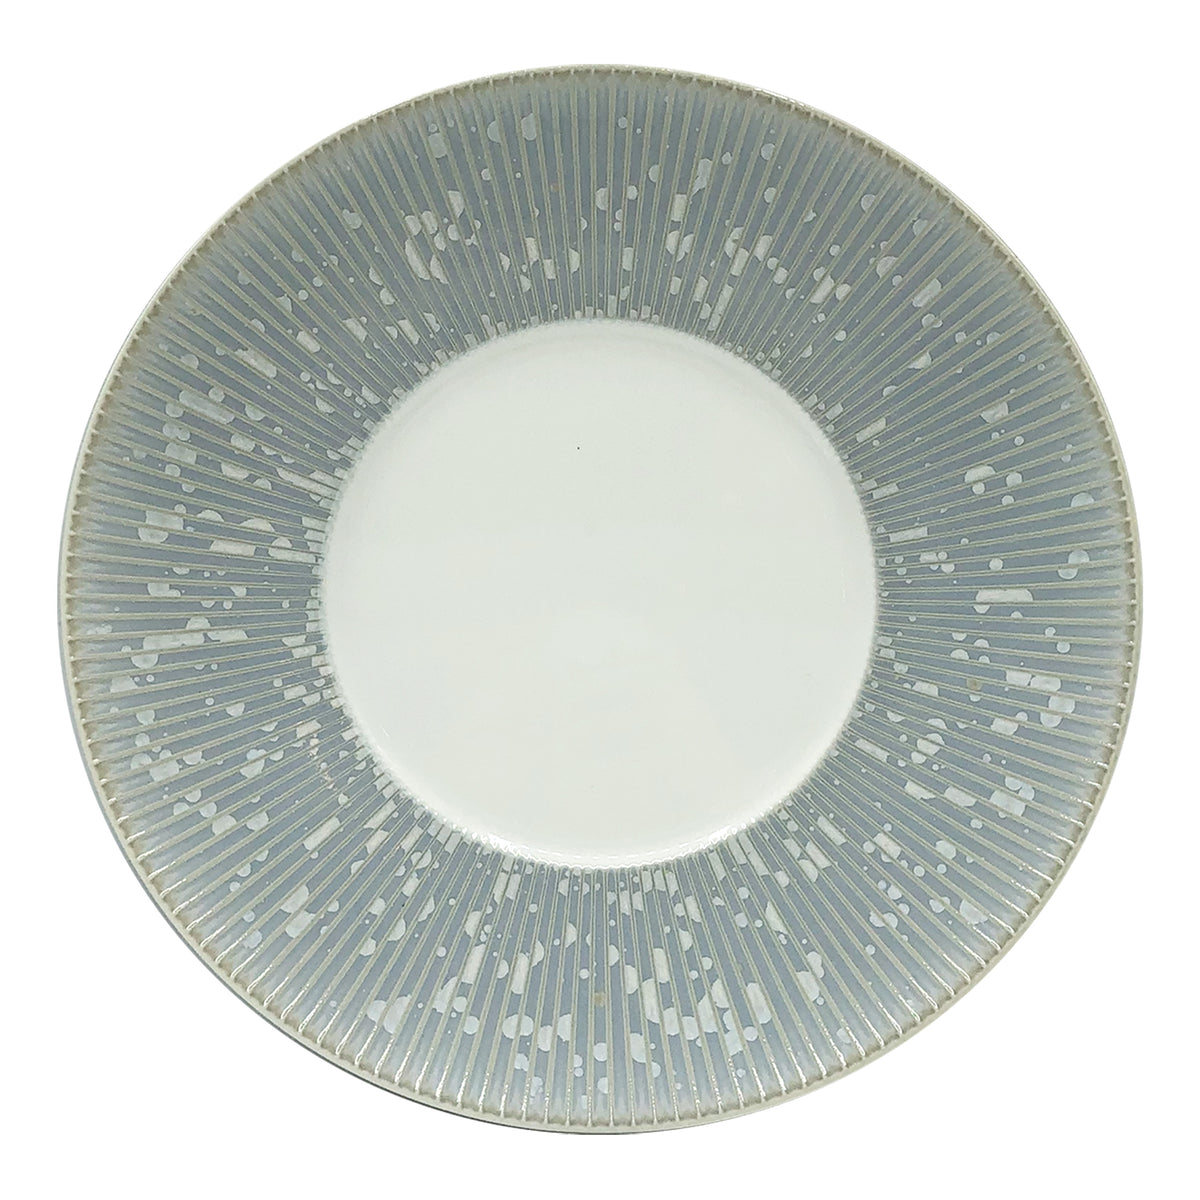 SONG Orage - Charger plate, Bolero